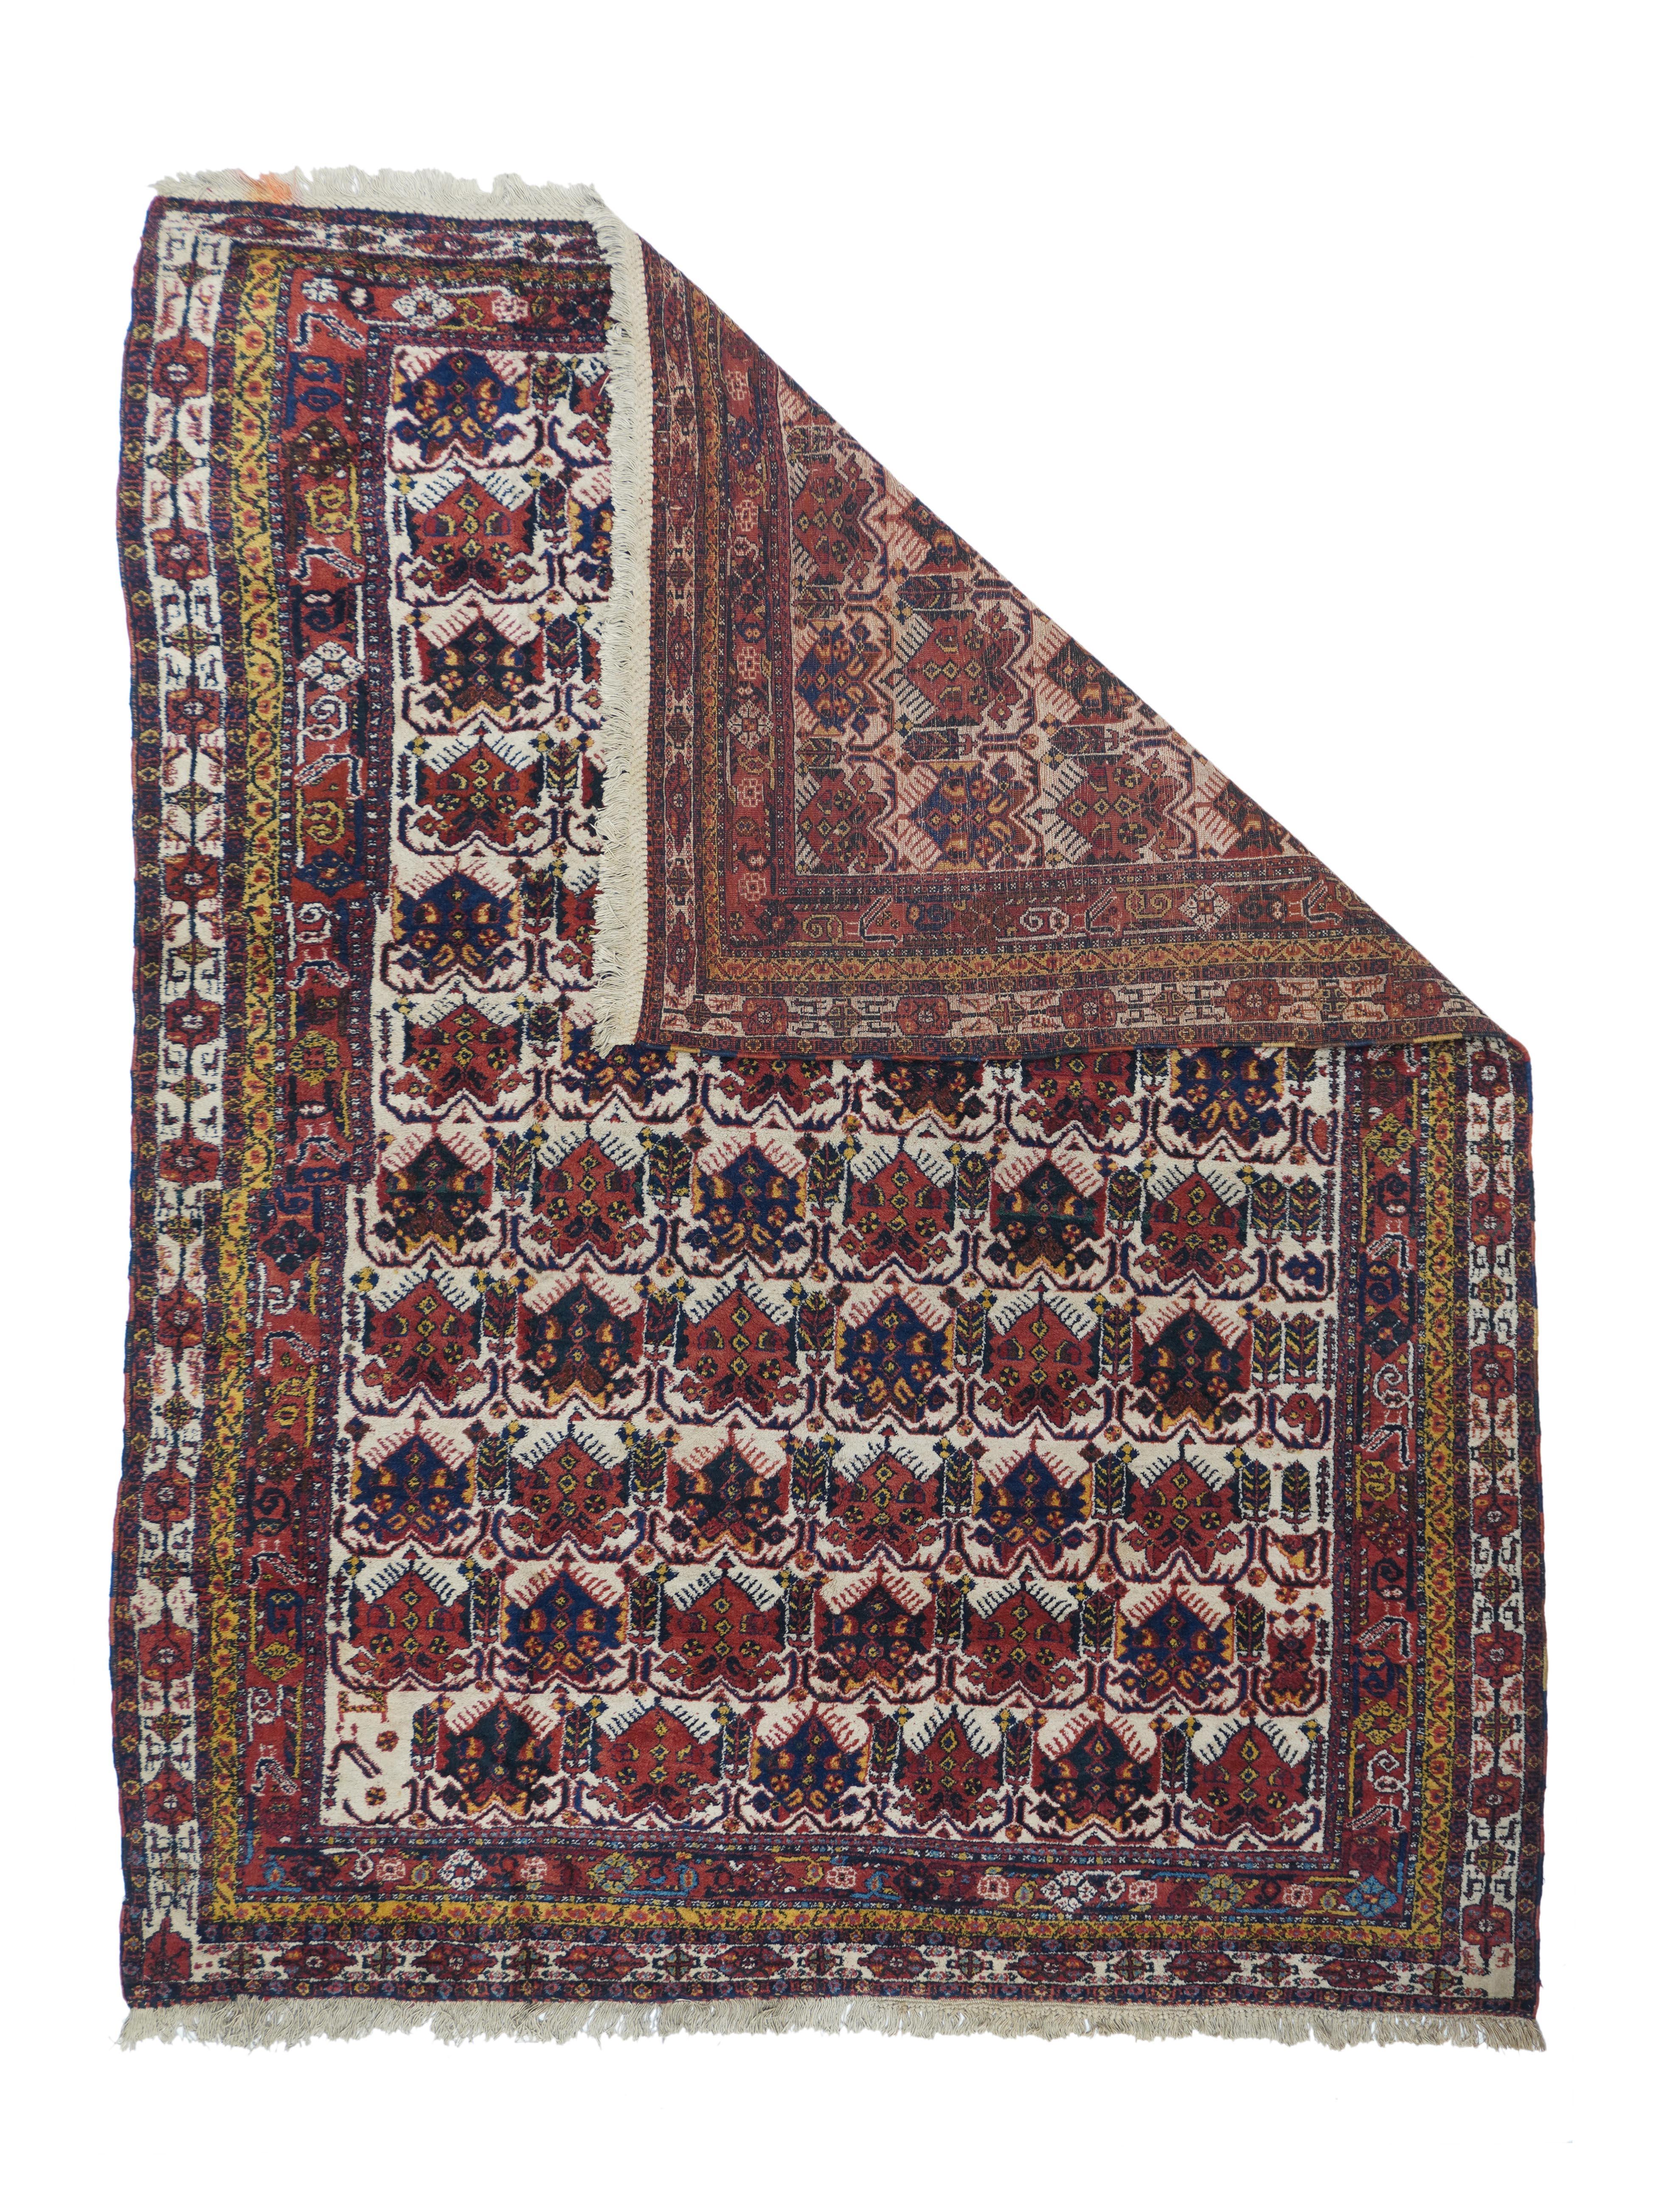 Antique Afshar Rug 4'11'' x 6'6''. The natural ecru field shows 11 rows of six fringed palmettes each, in a one way layout. Alternating red and navy palmettes, Inner borders adjust at centre of left side. Main ivory border of cartouche chains, and